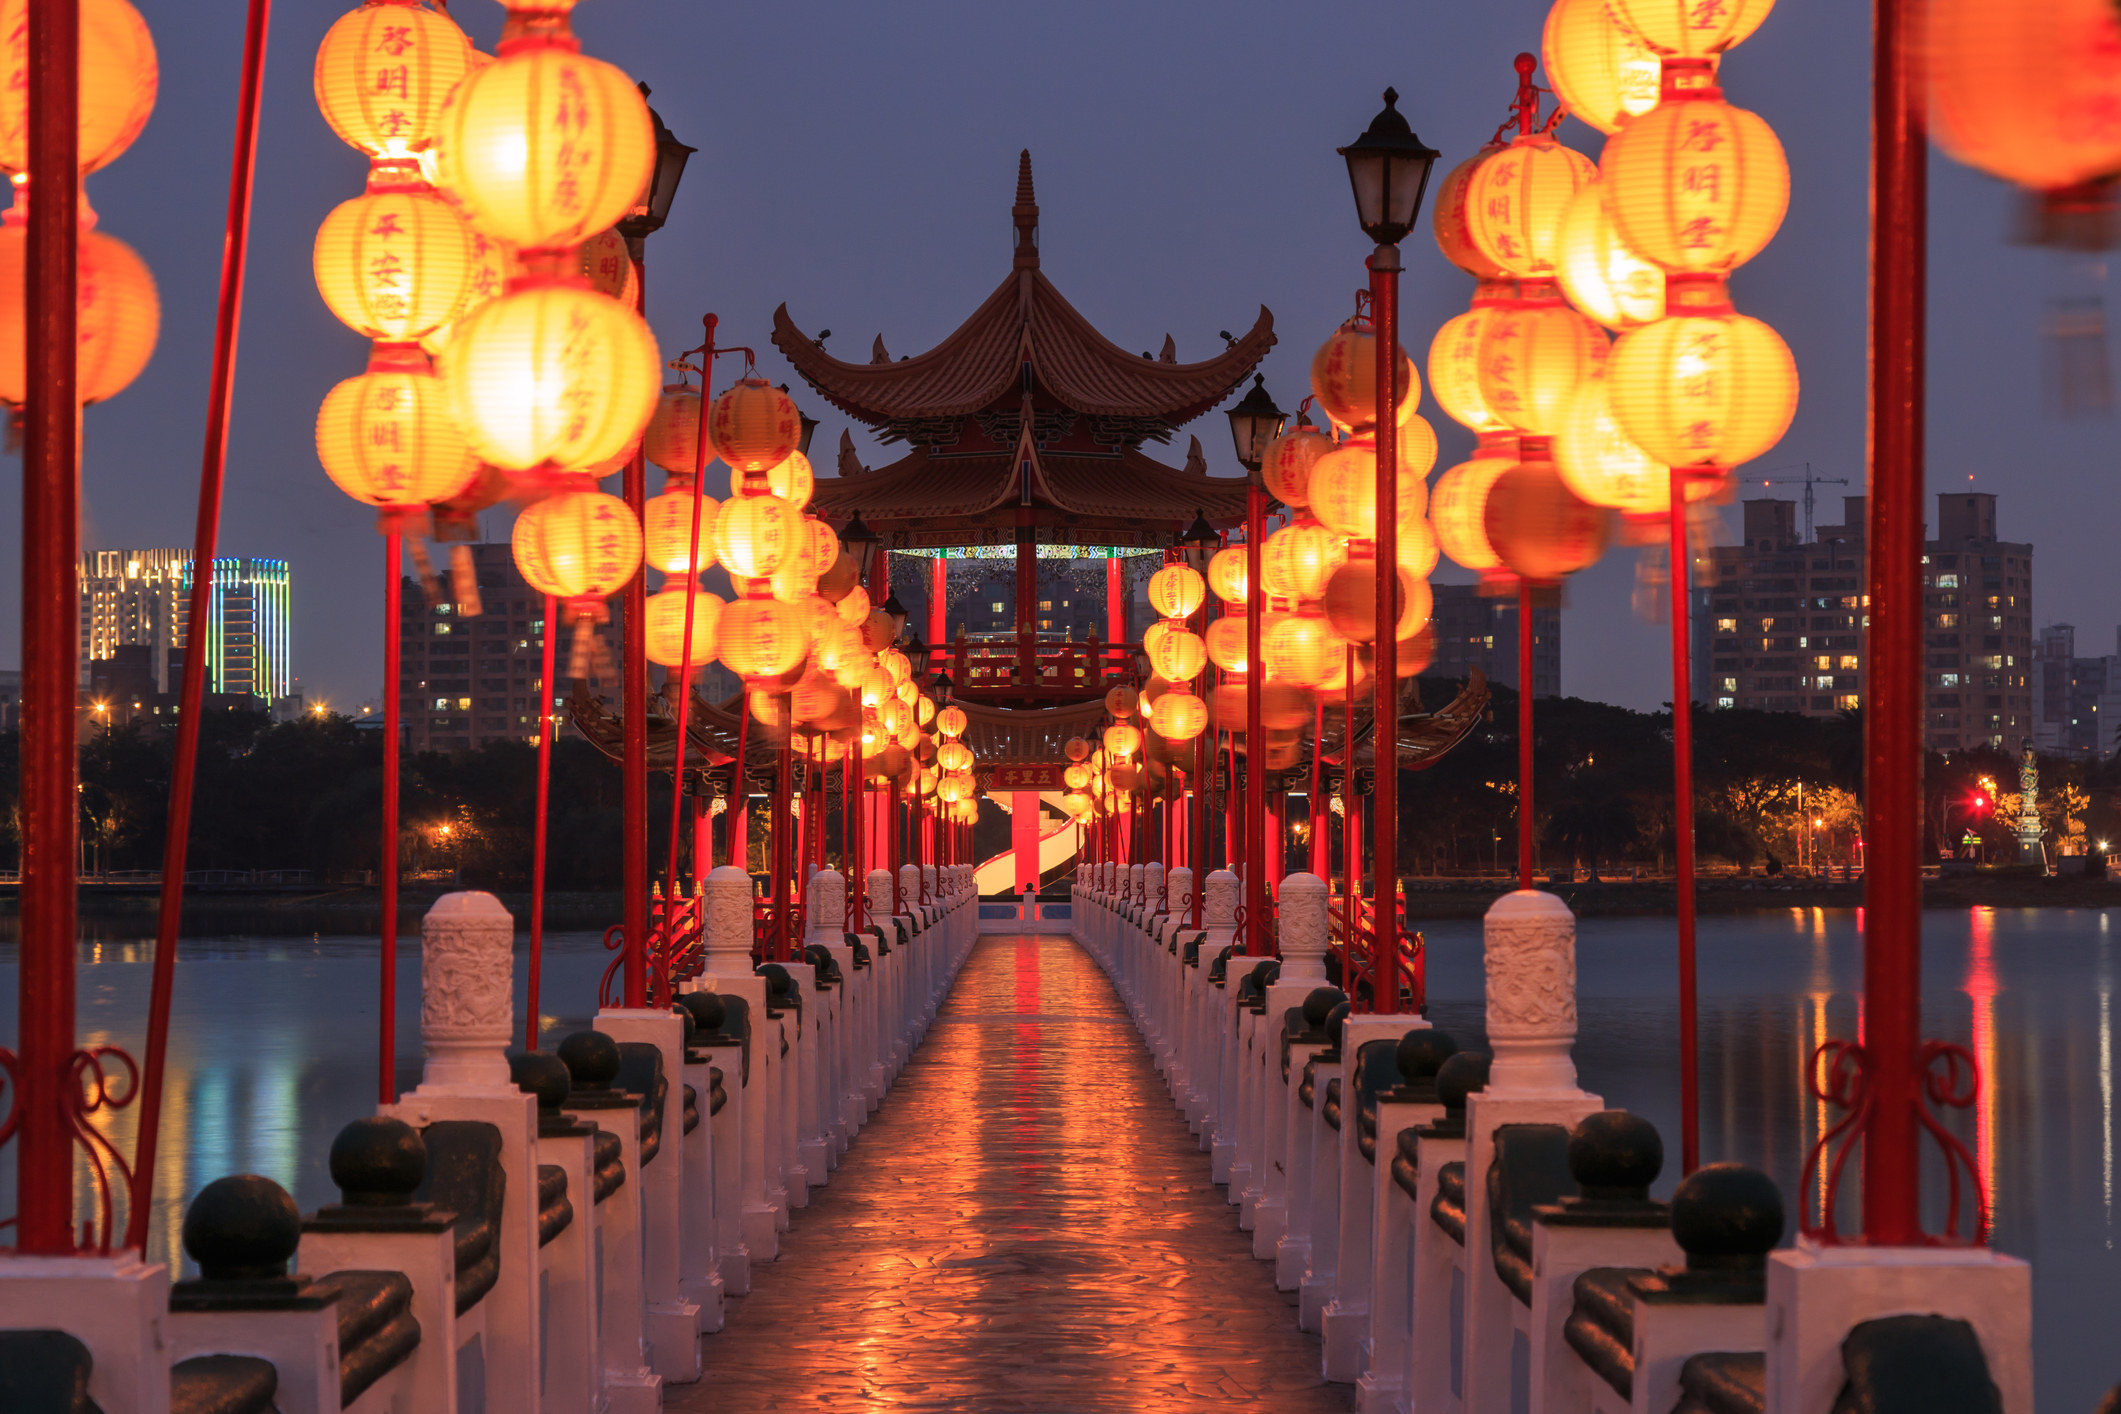 Lanterns leading to a temple.